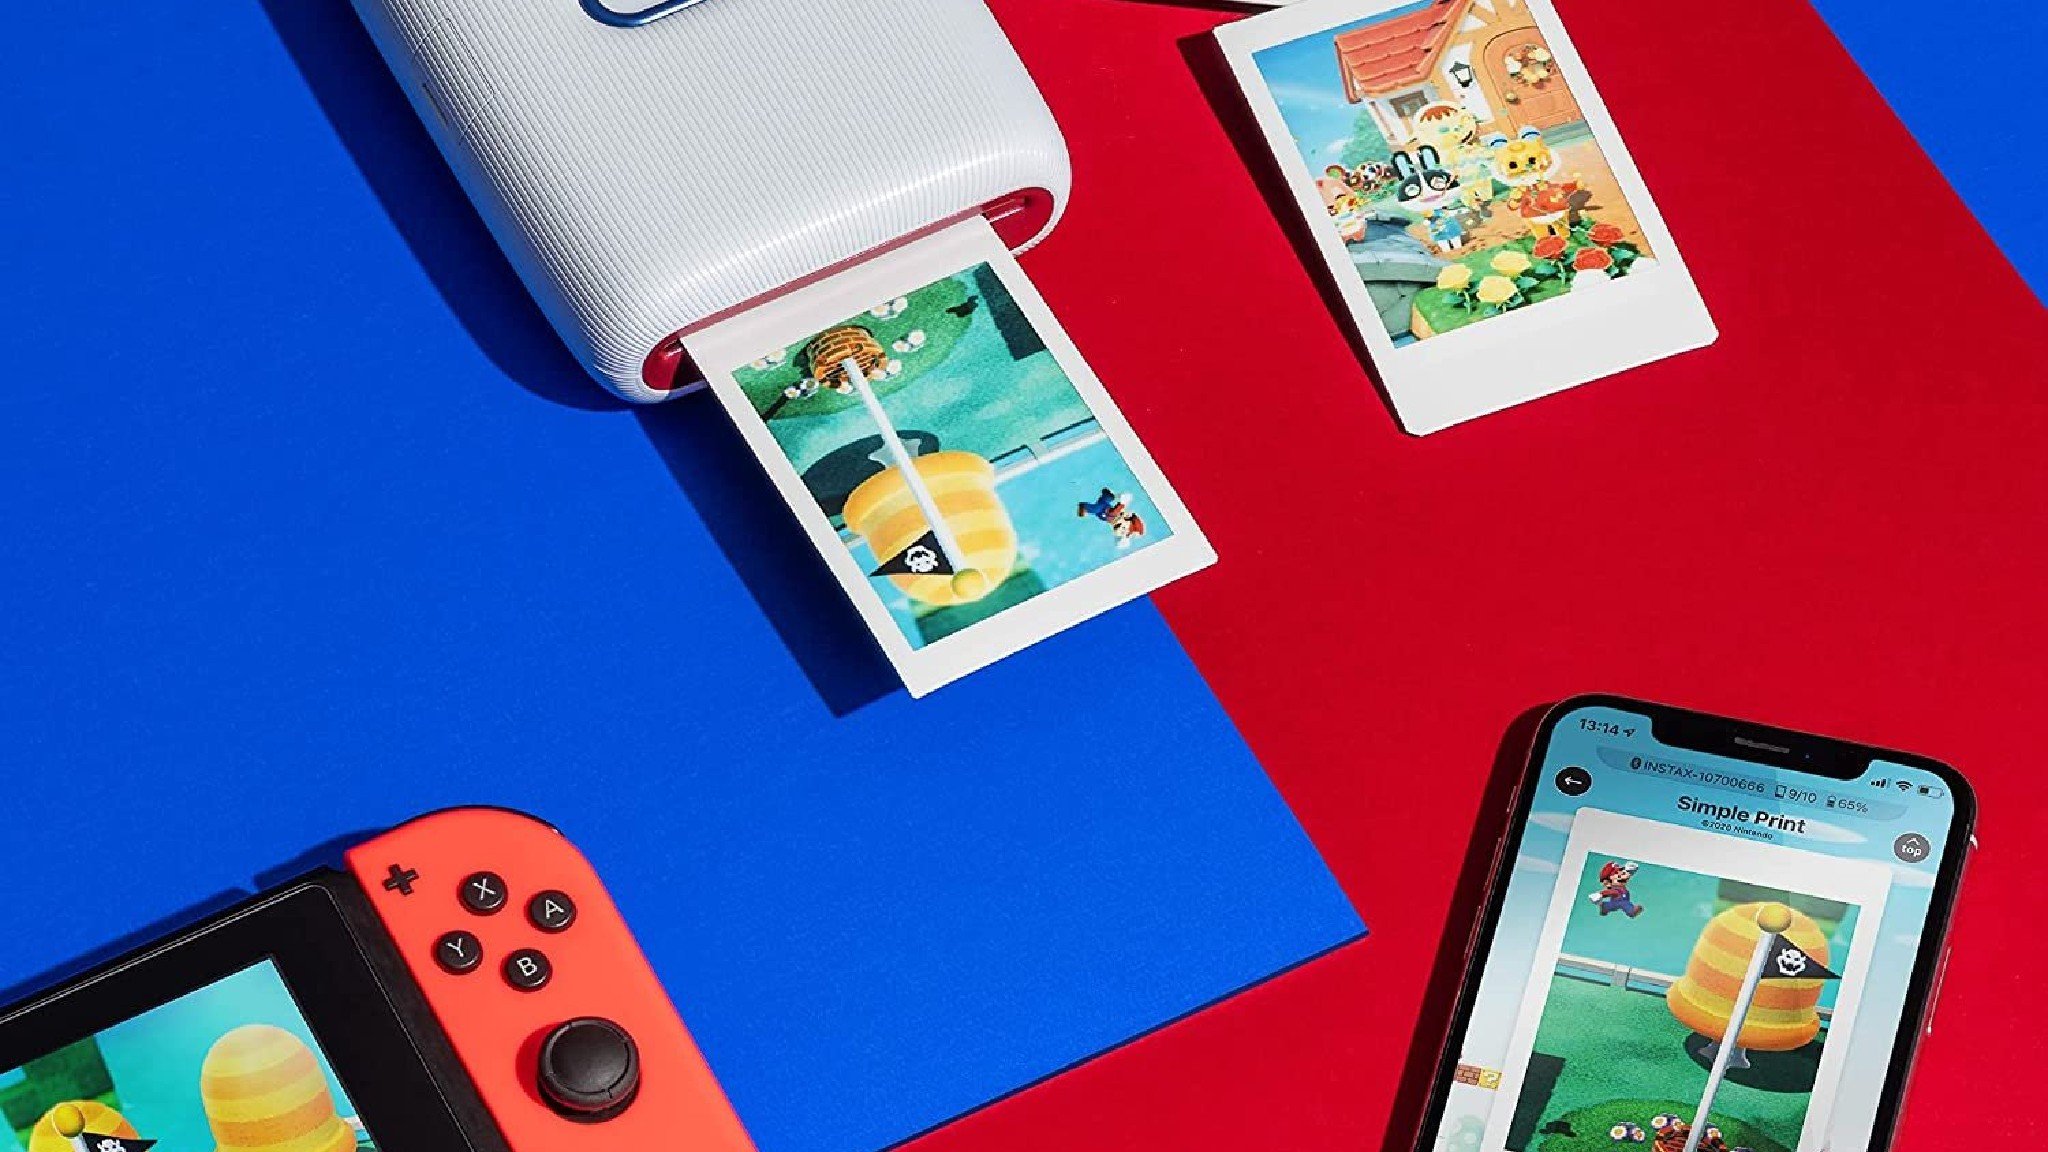 instax mini Link Photo Printer for Nintendo Switch is back in stock